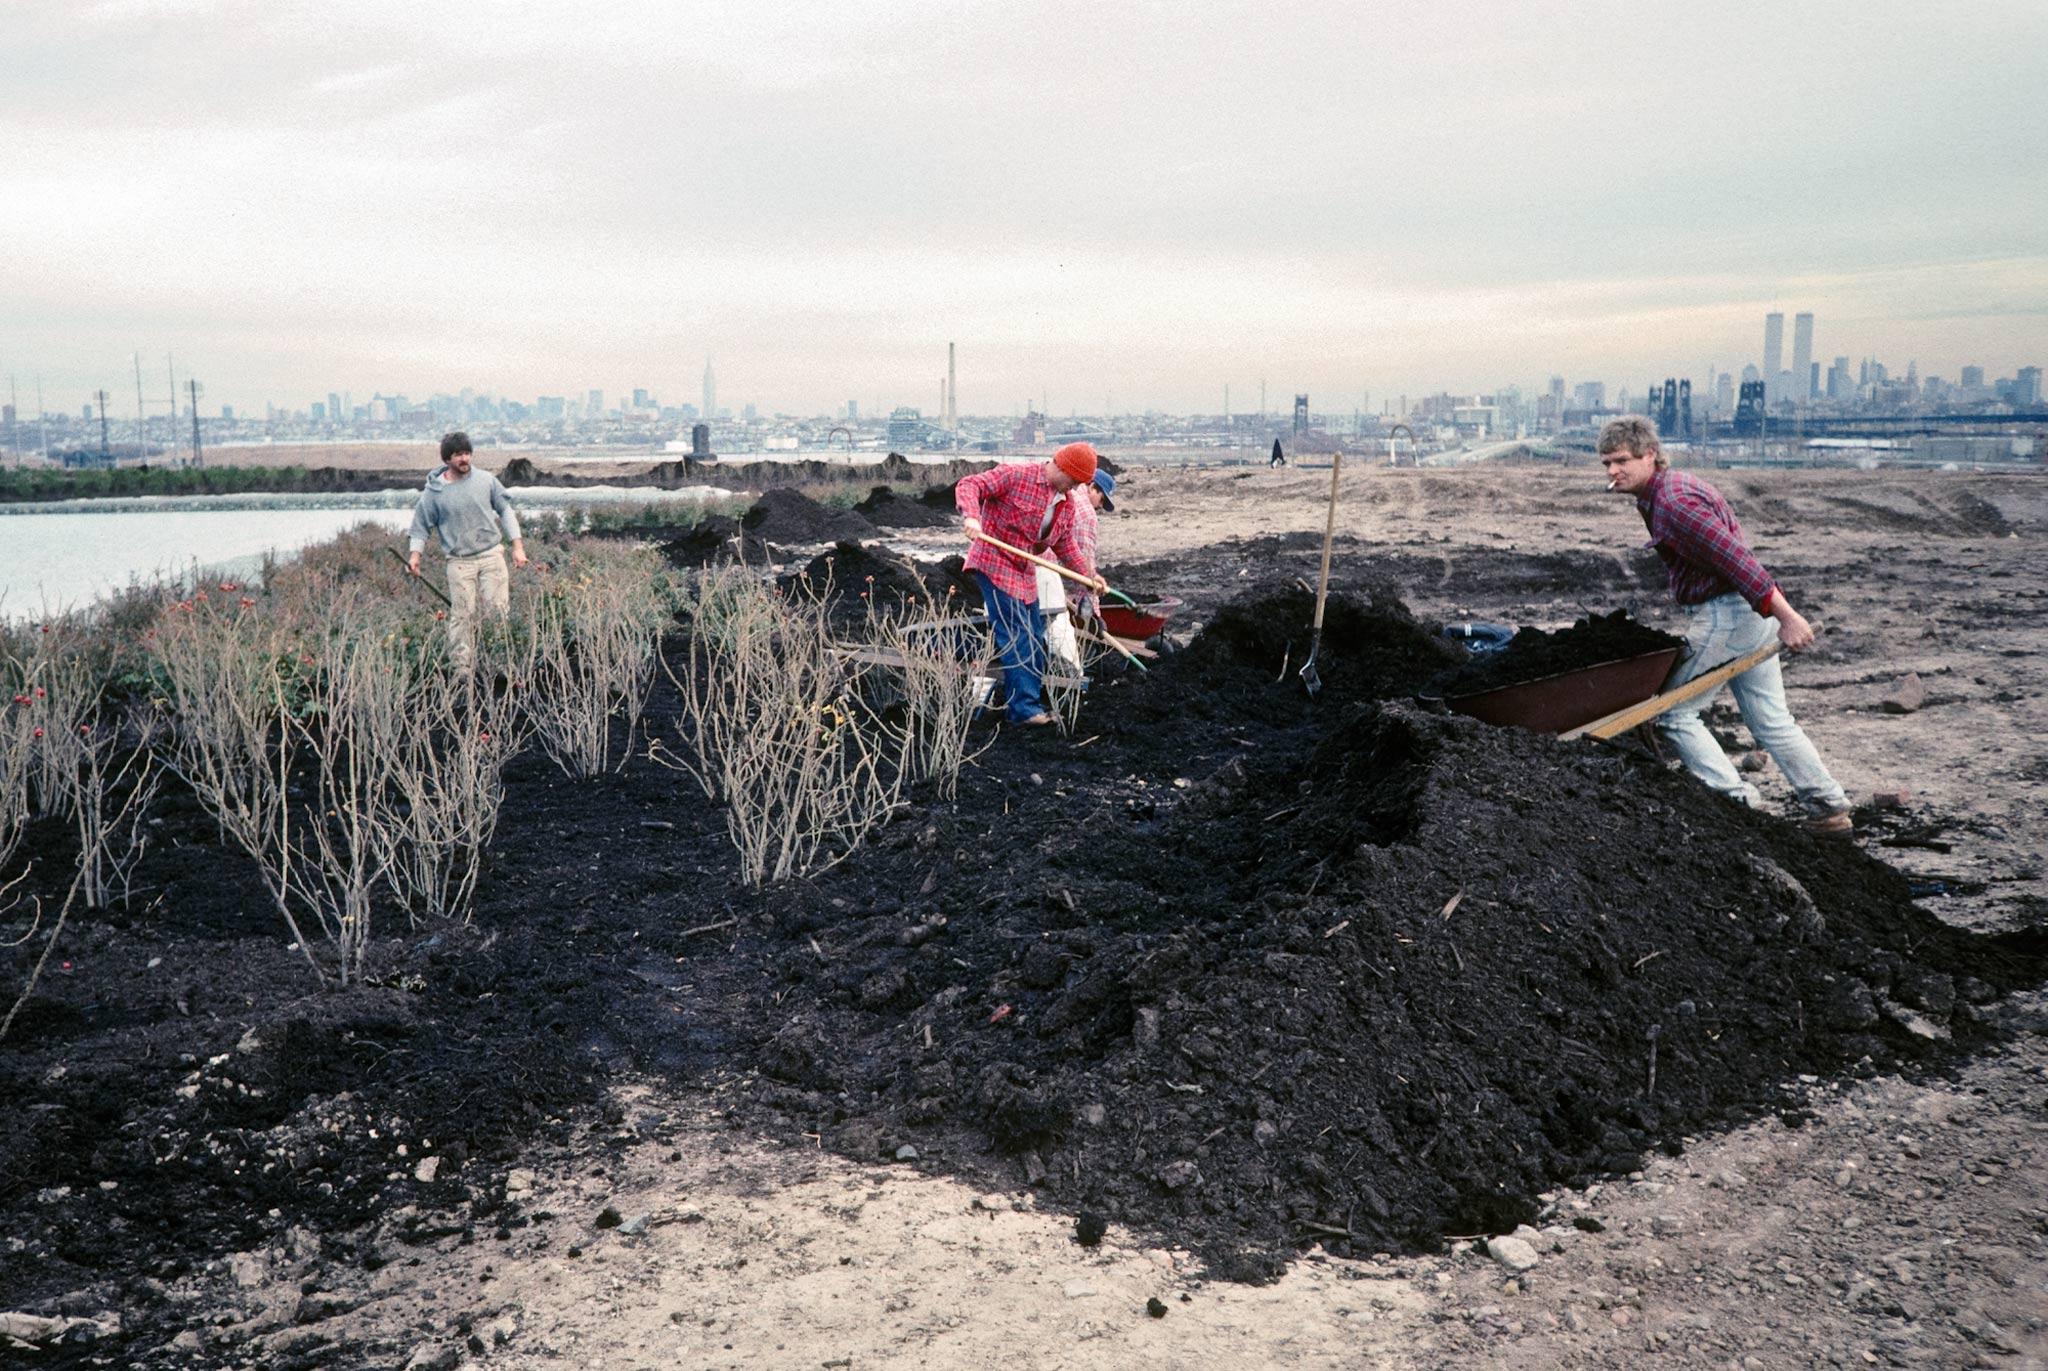 Workers moving soil and planting bushes with a city skyline in the distant background